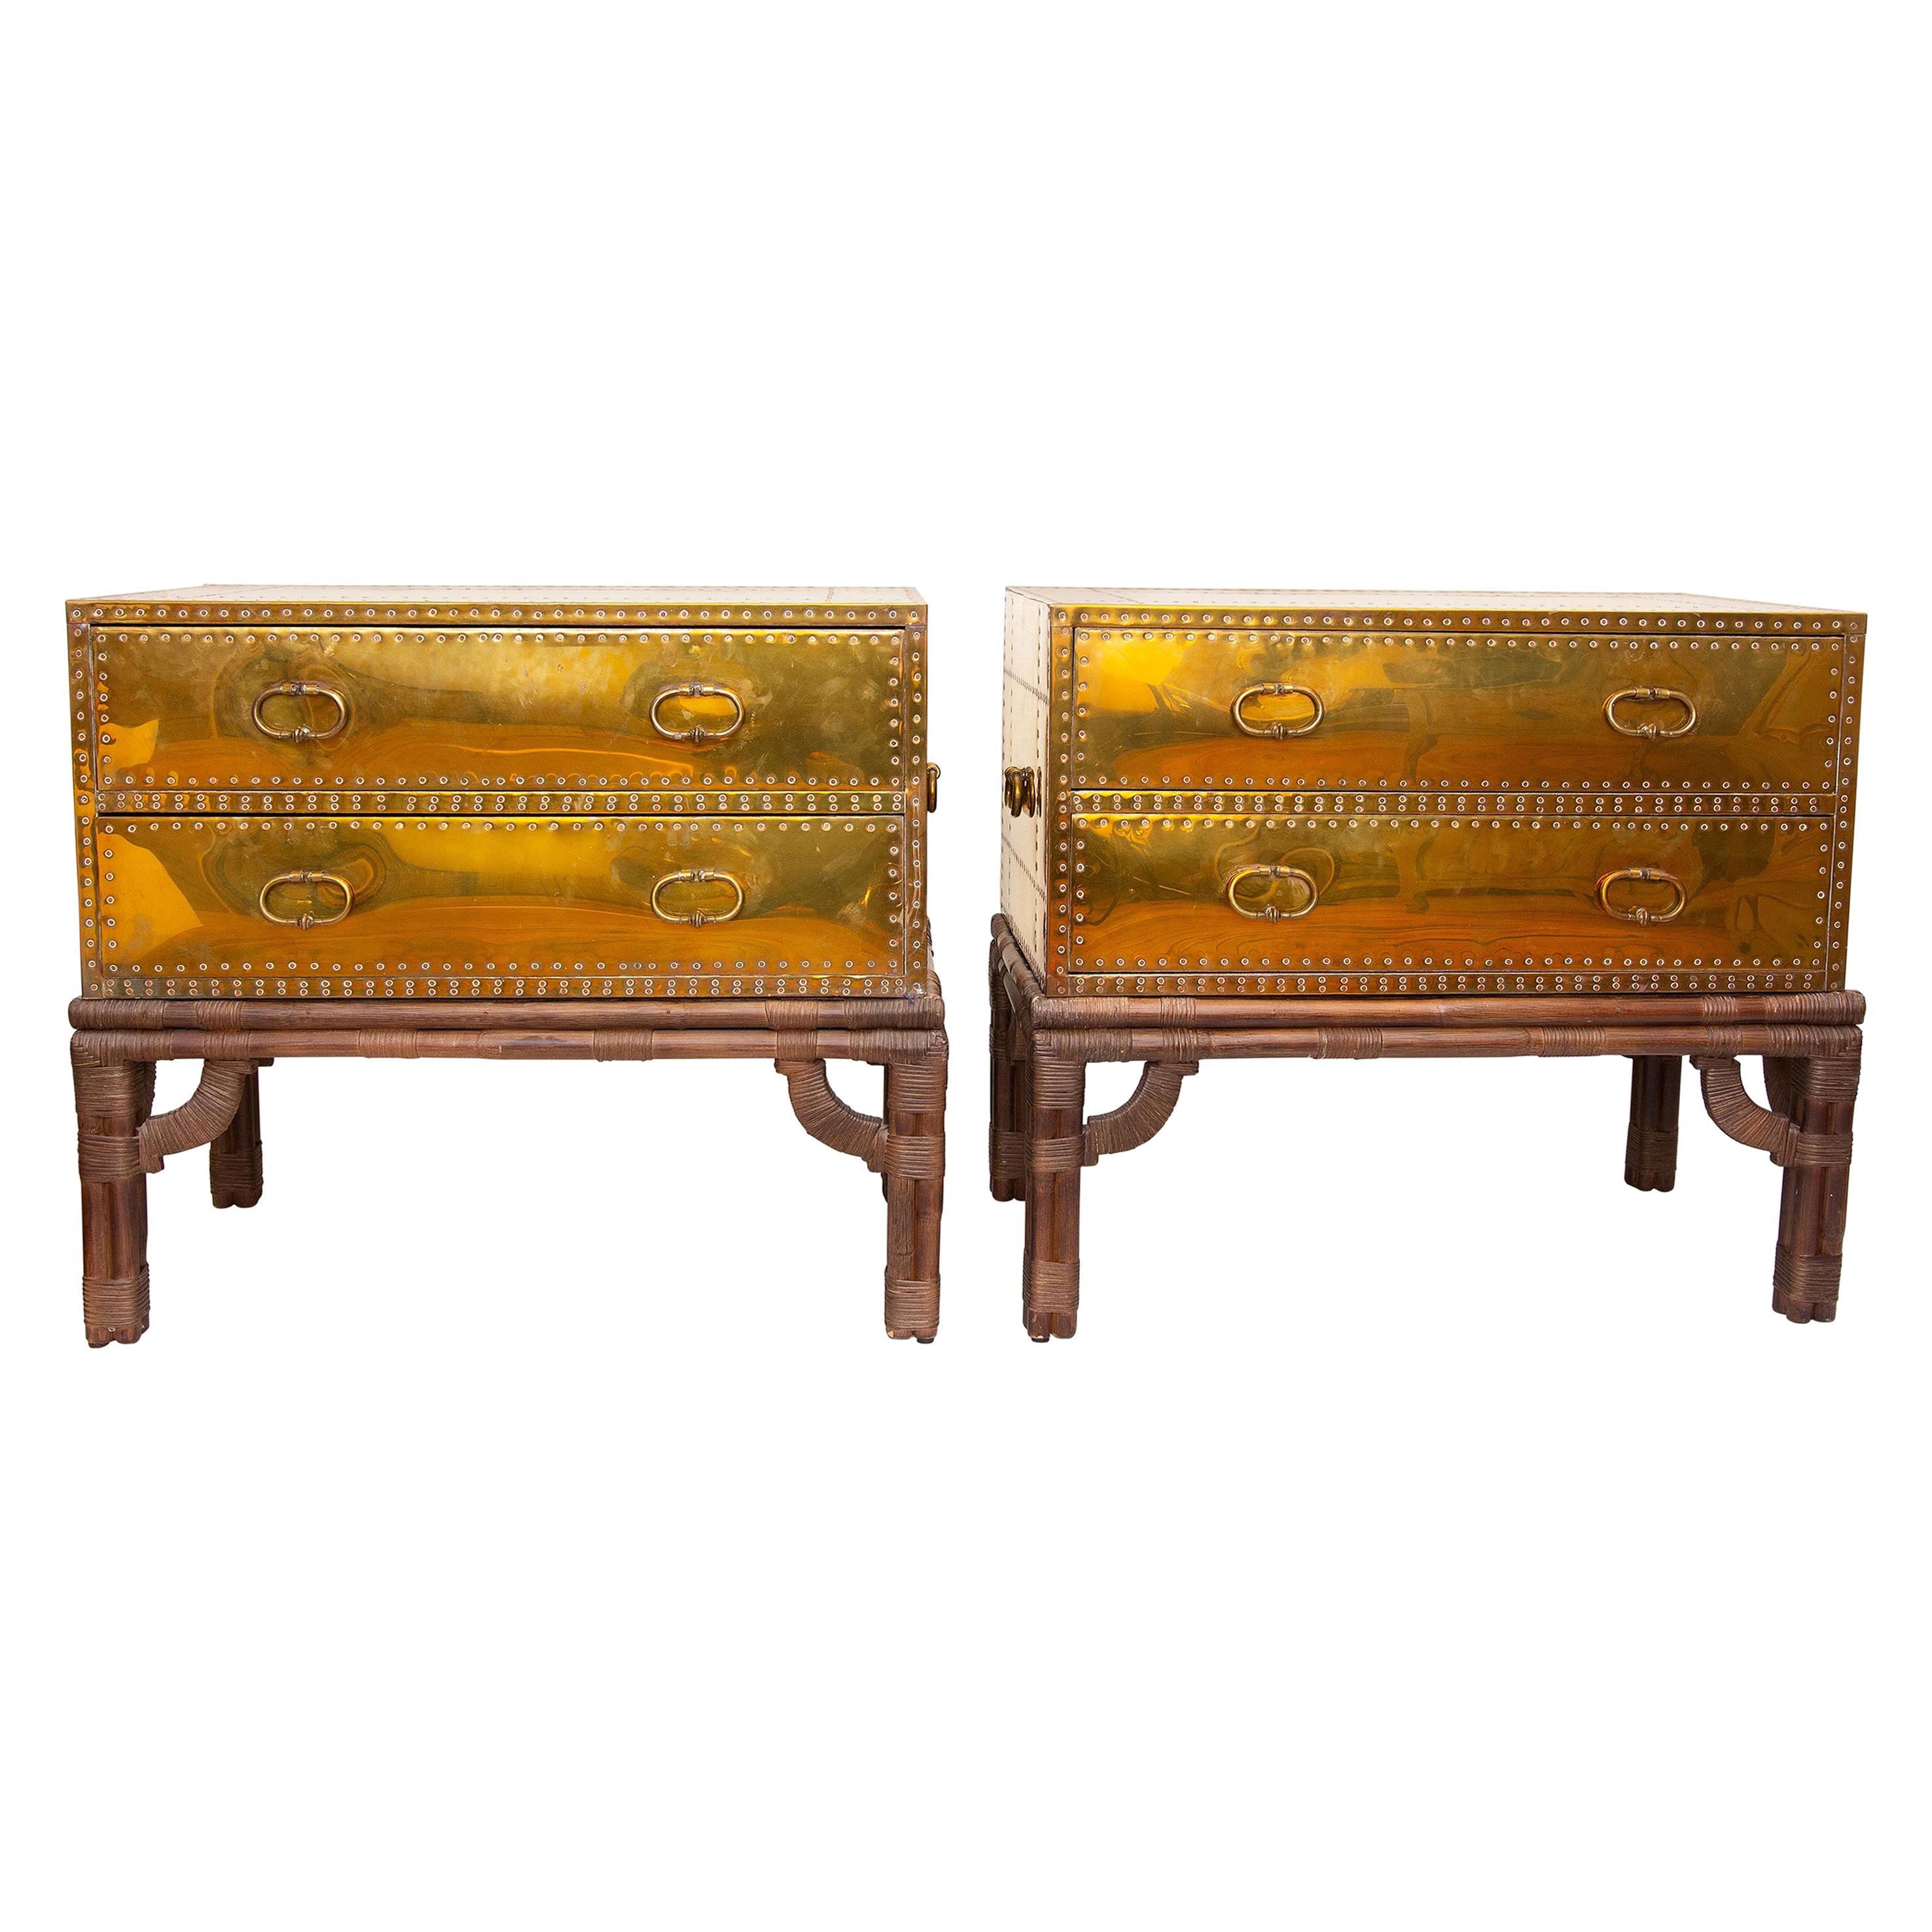 Pair of Campaign Style Brass Two-Drawer Chest on Stands Sarreid Ltd., Spain